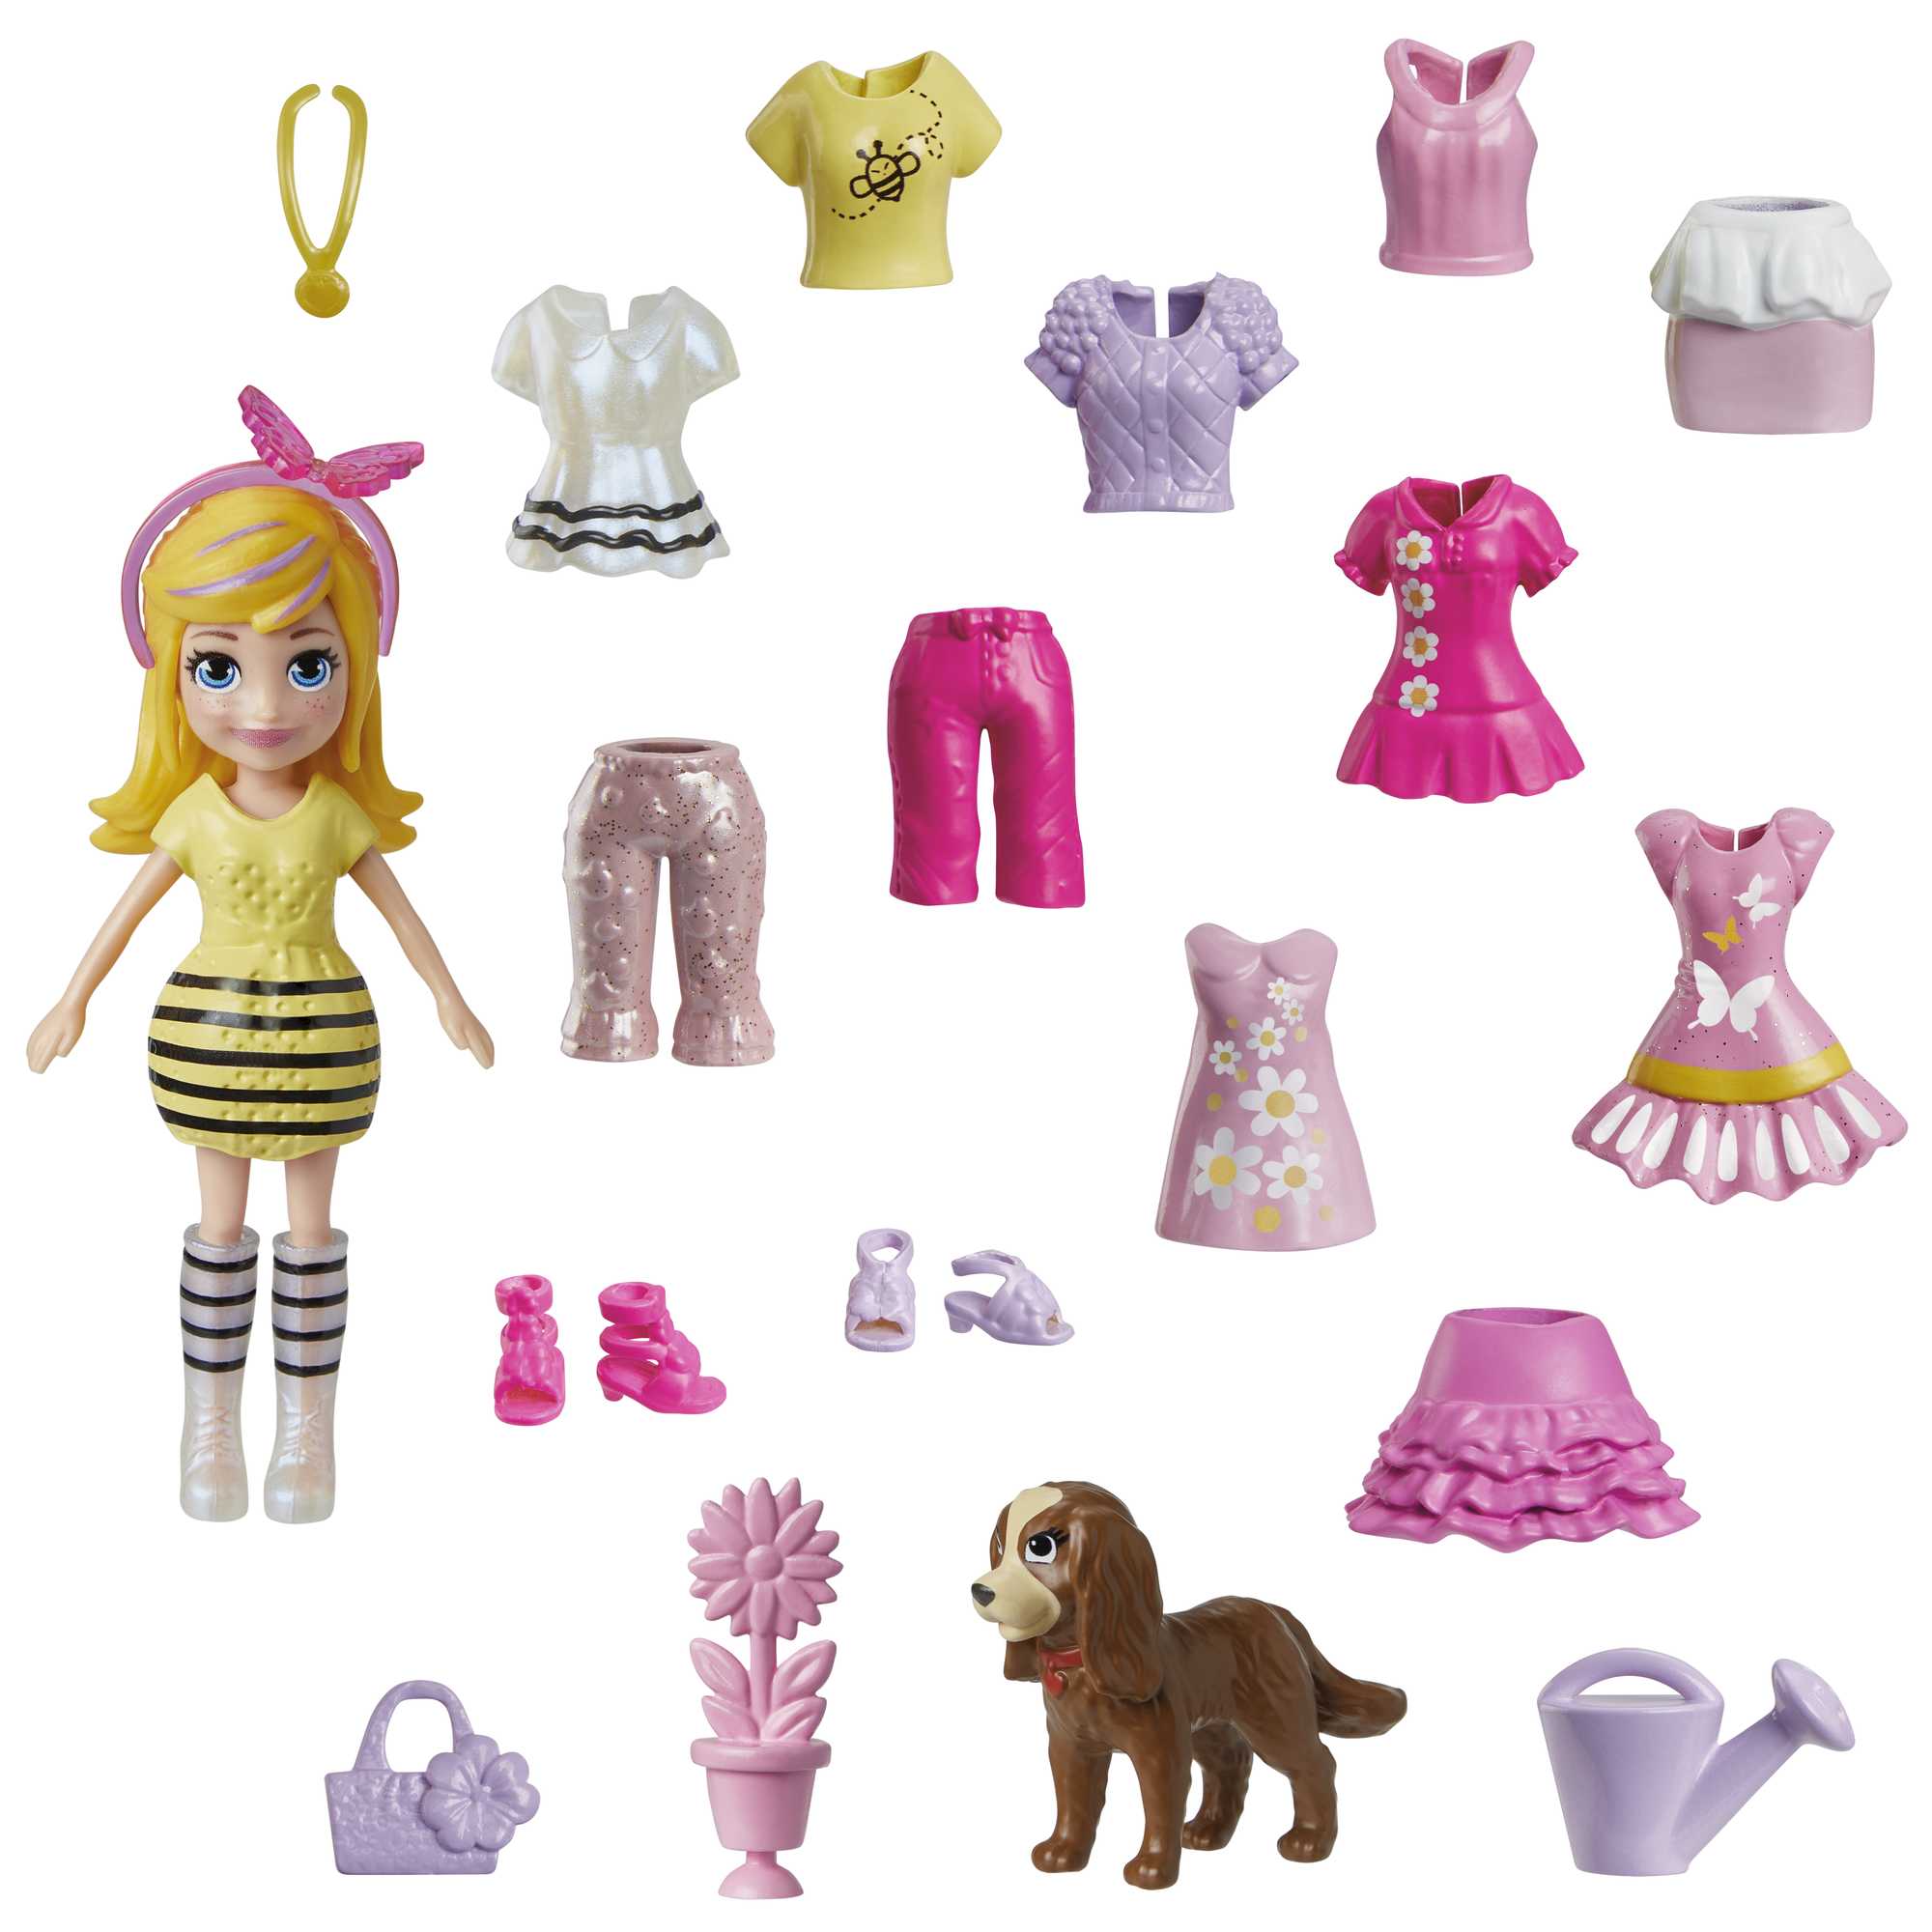 Explore the collection of Polly Pocket fashion packs, like this